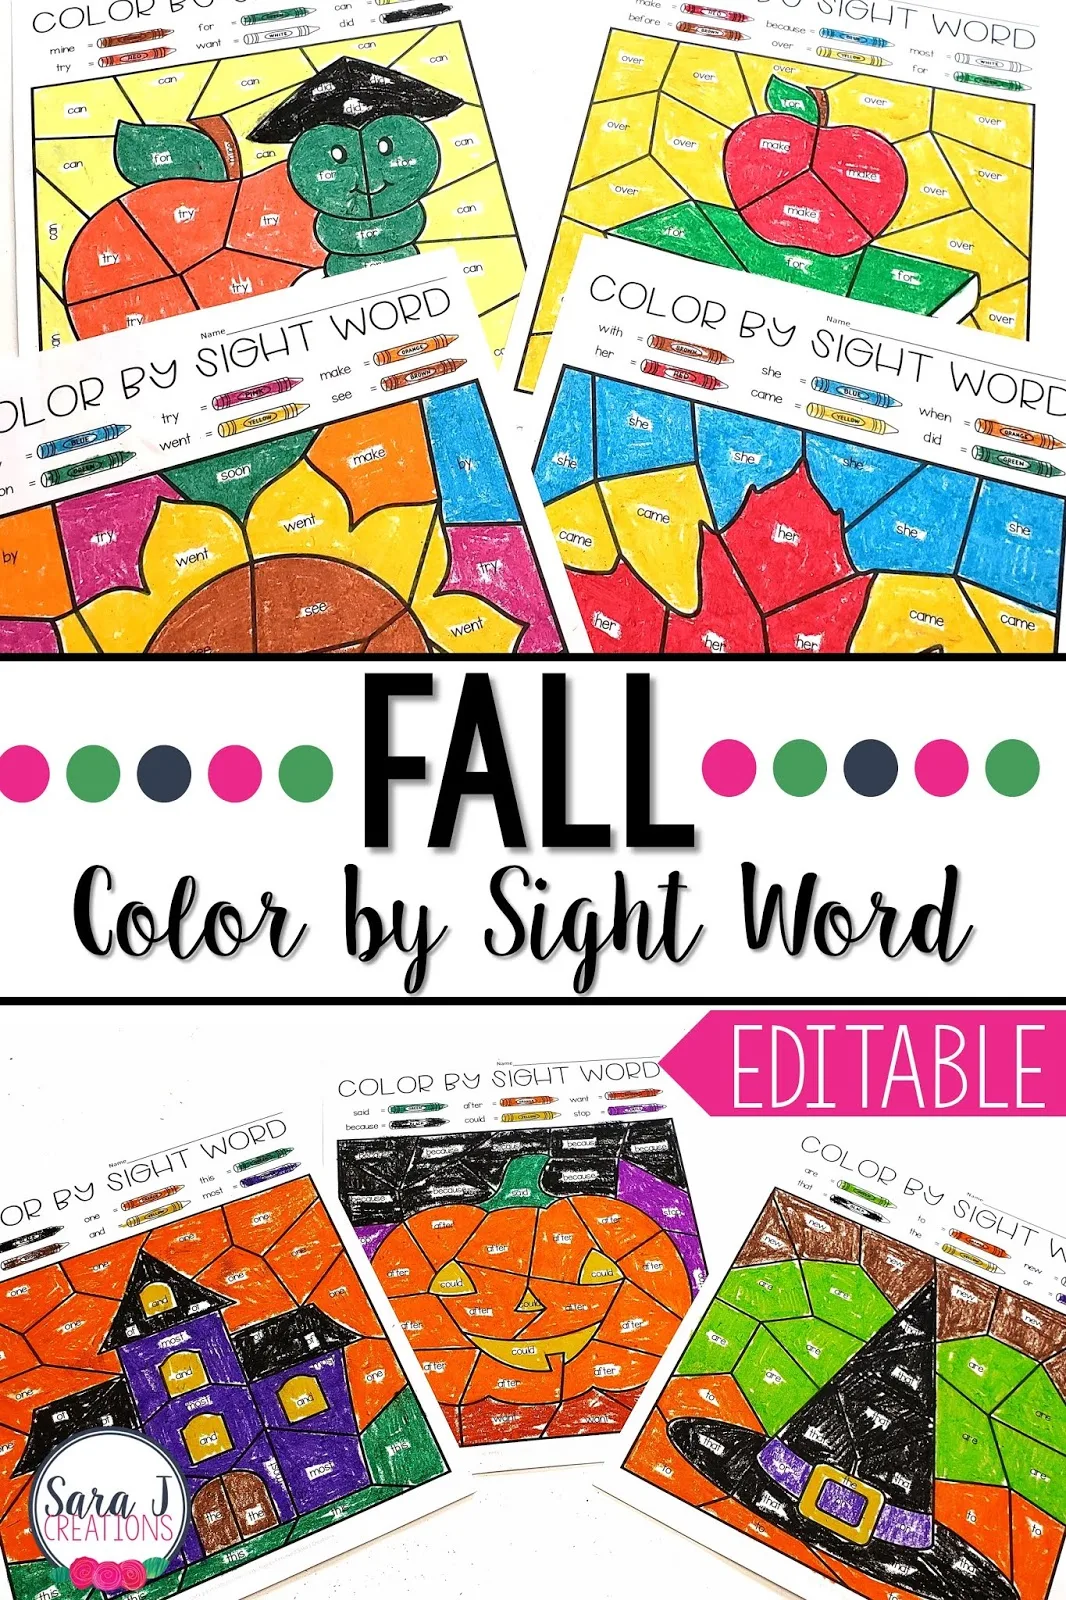 Editable Fall Color by Sight Word pages!!!! This is exactly what you need to make practicing sight words more fun this fall. You can easily differentiate for each student with a few quick clicks. Perfect for back to school, fall/autumn, Halloween and Thanksgiving.